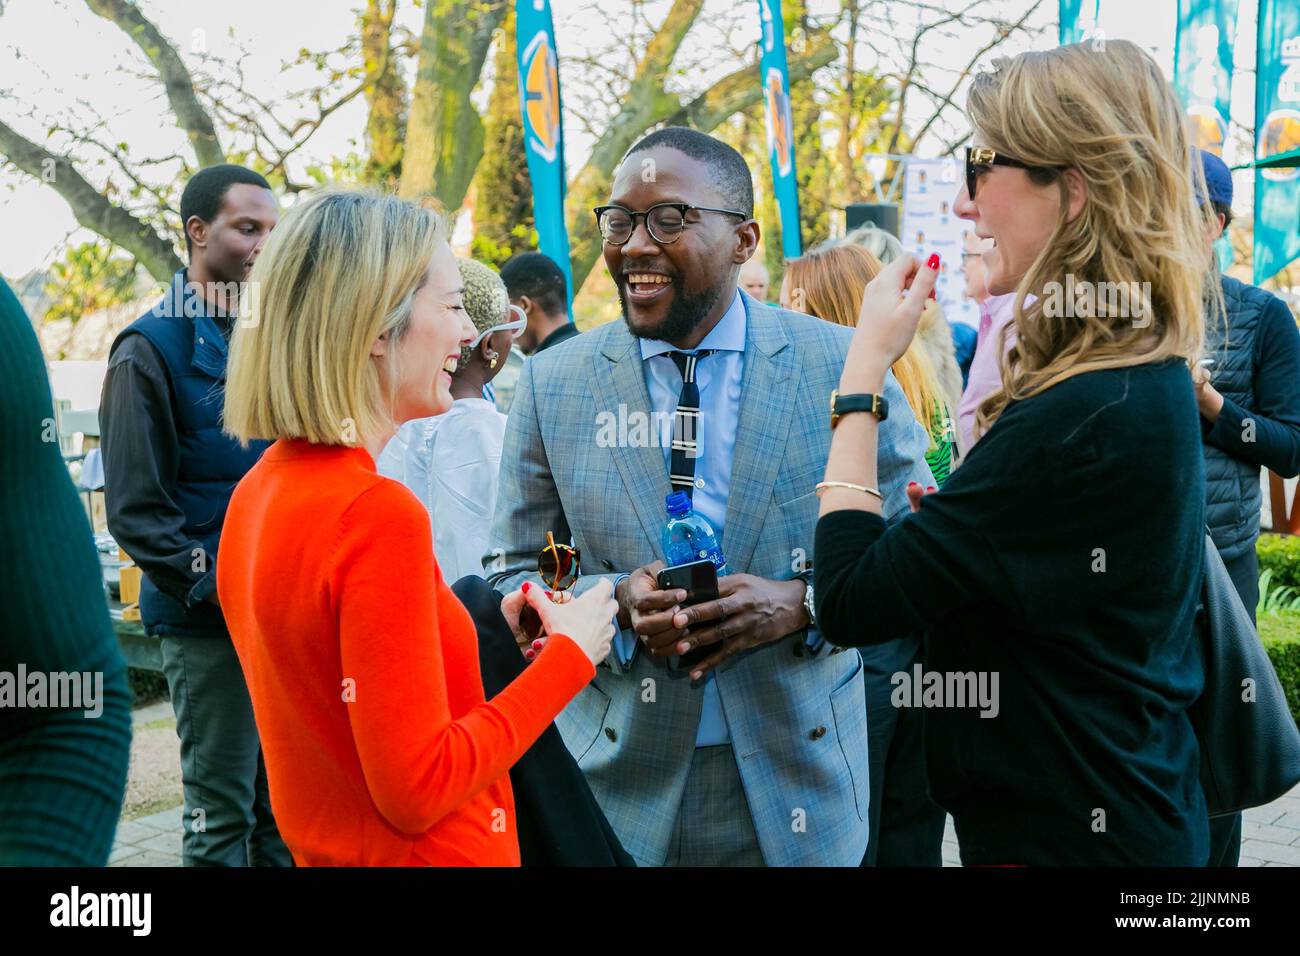 The VIP guests mingling at an outdoor social event Stock Photo